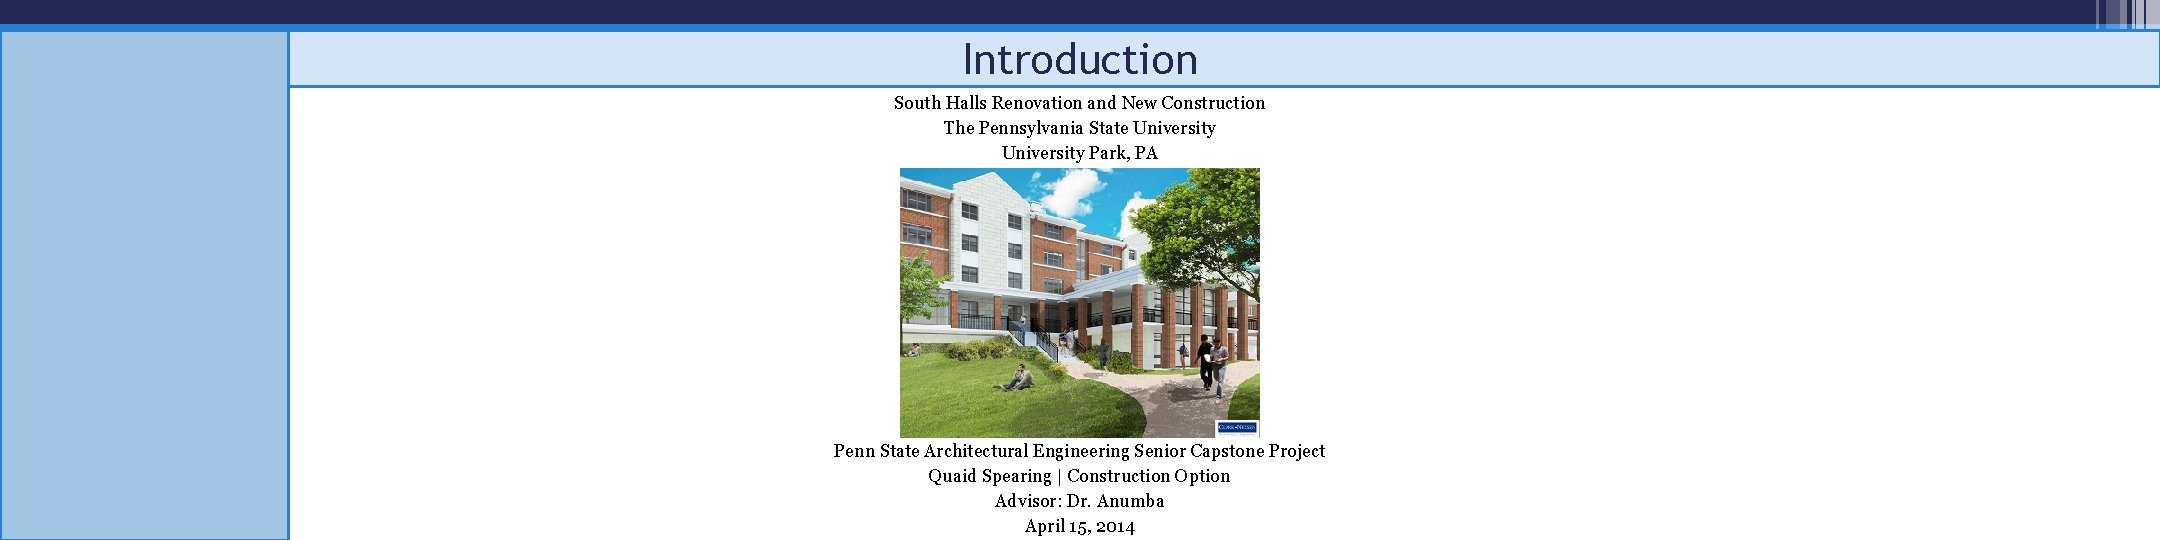 Introduction South Halls Renovation and New Construction The Pennsylvania State University Park, PA Penn